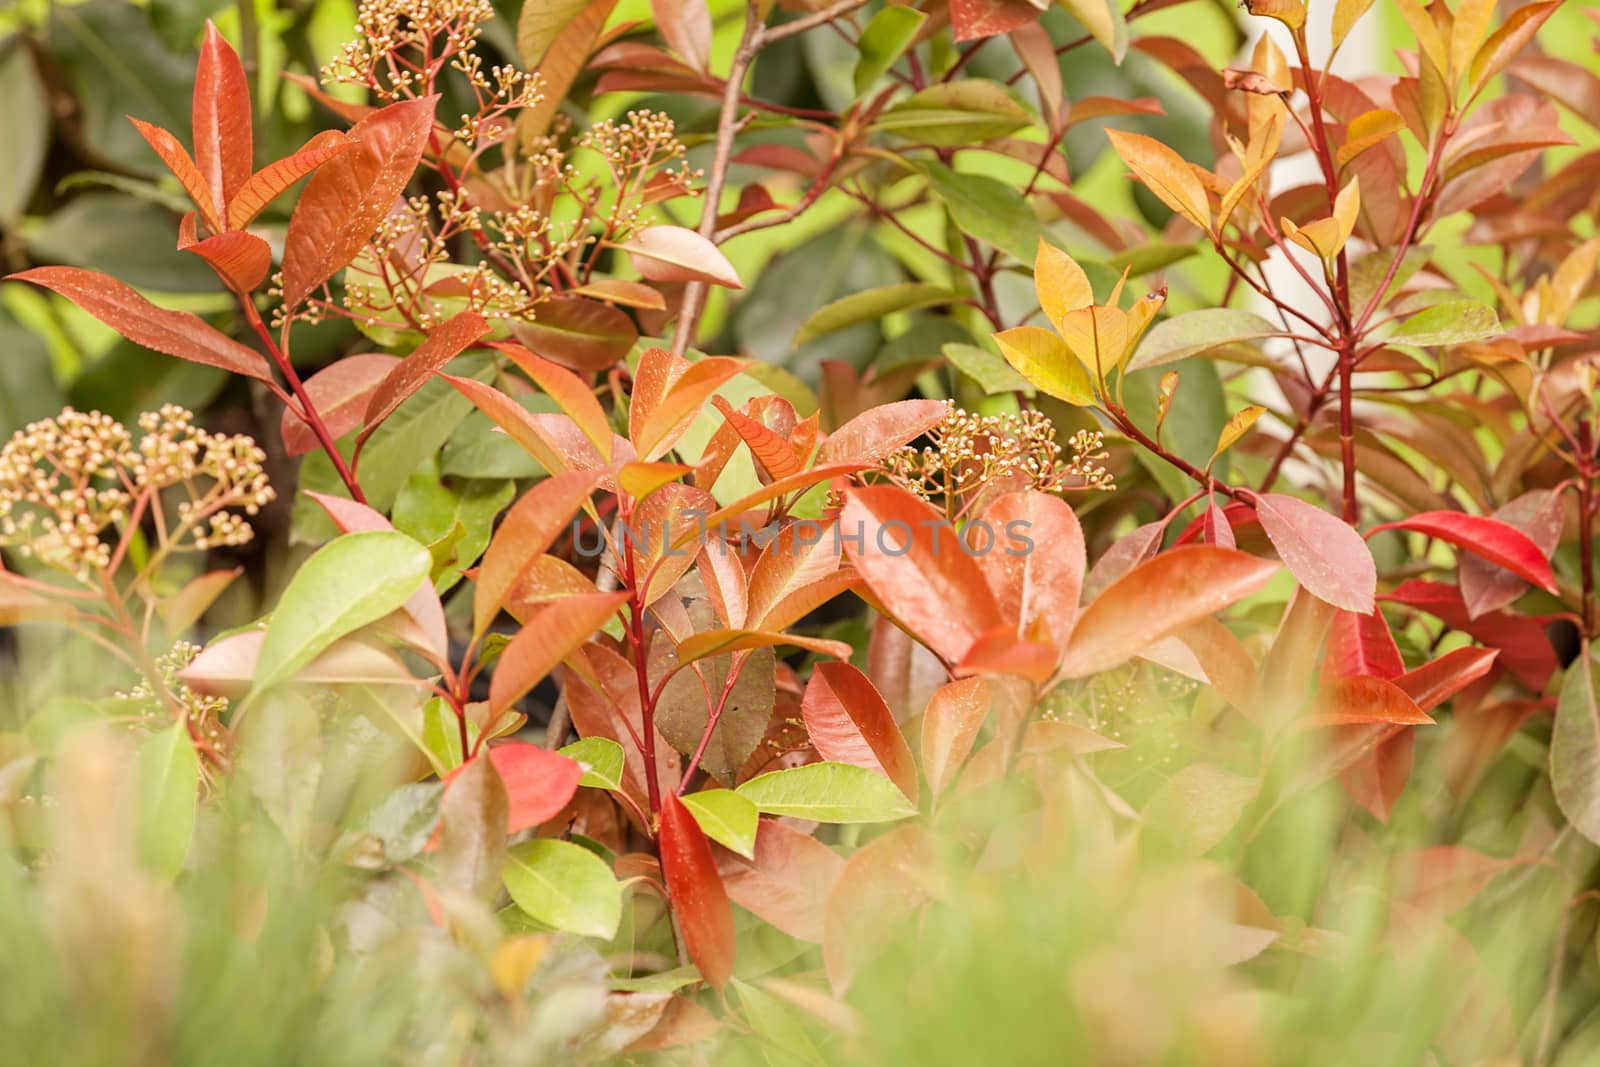 red and green leaves on the plants, note shallow depth of field